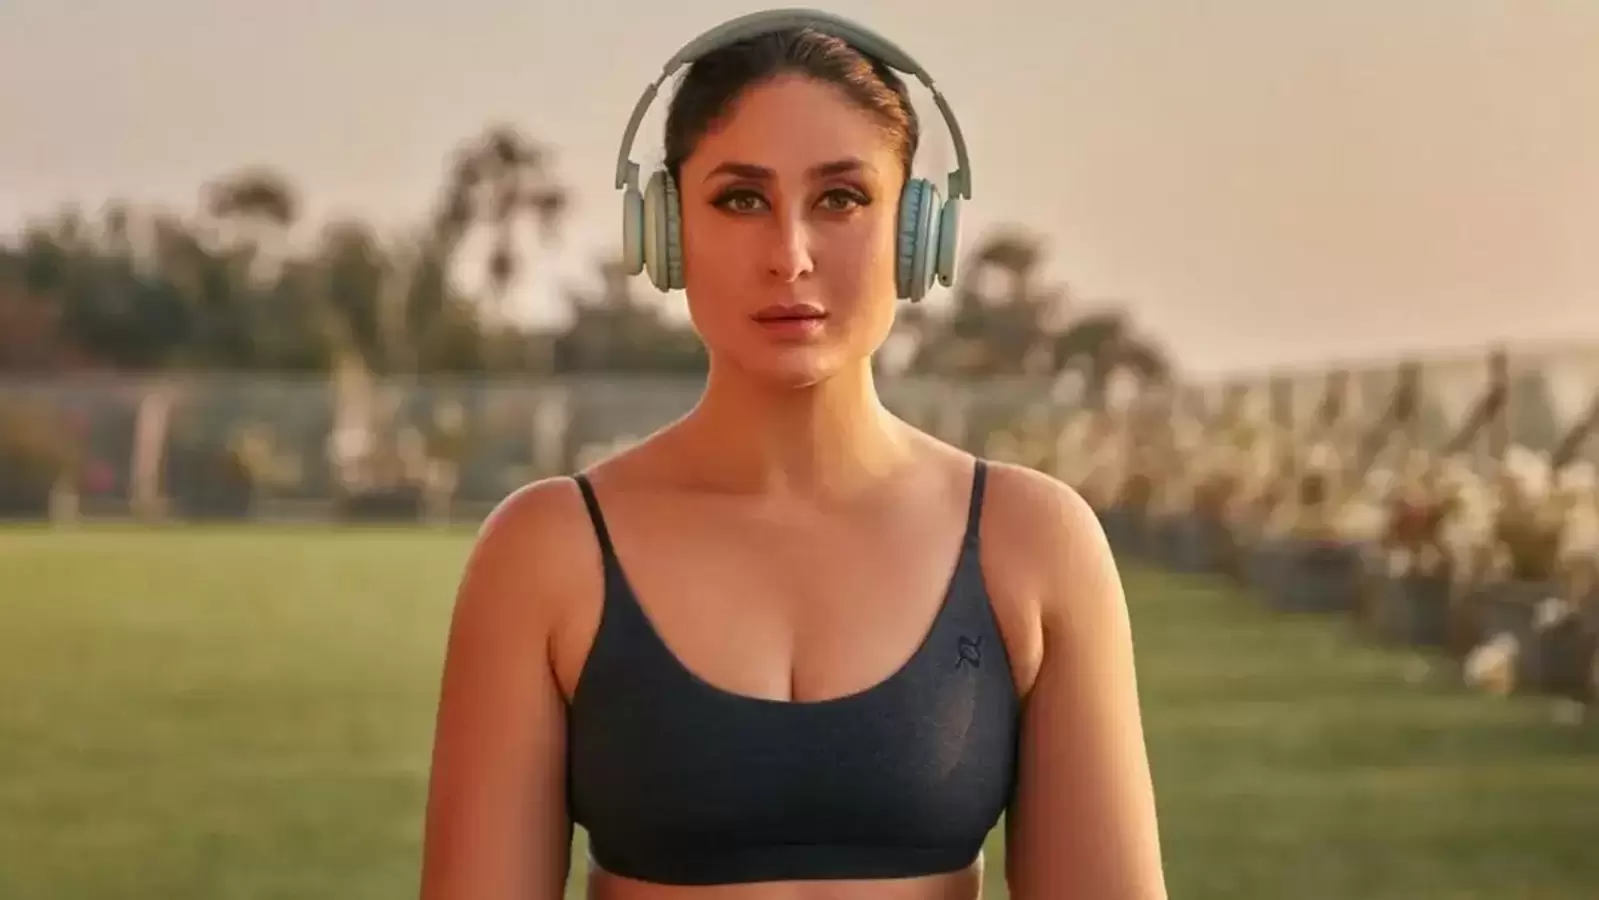 Kareena Kapoor believes ‘the world is a yoga mat’ as she nails different yoga asanas in new pics, read the benefits